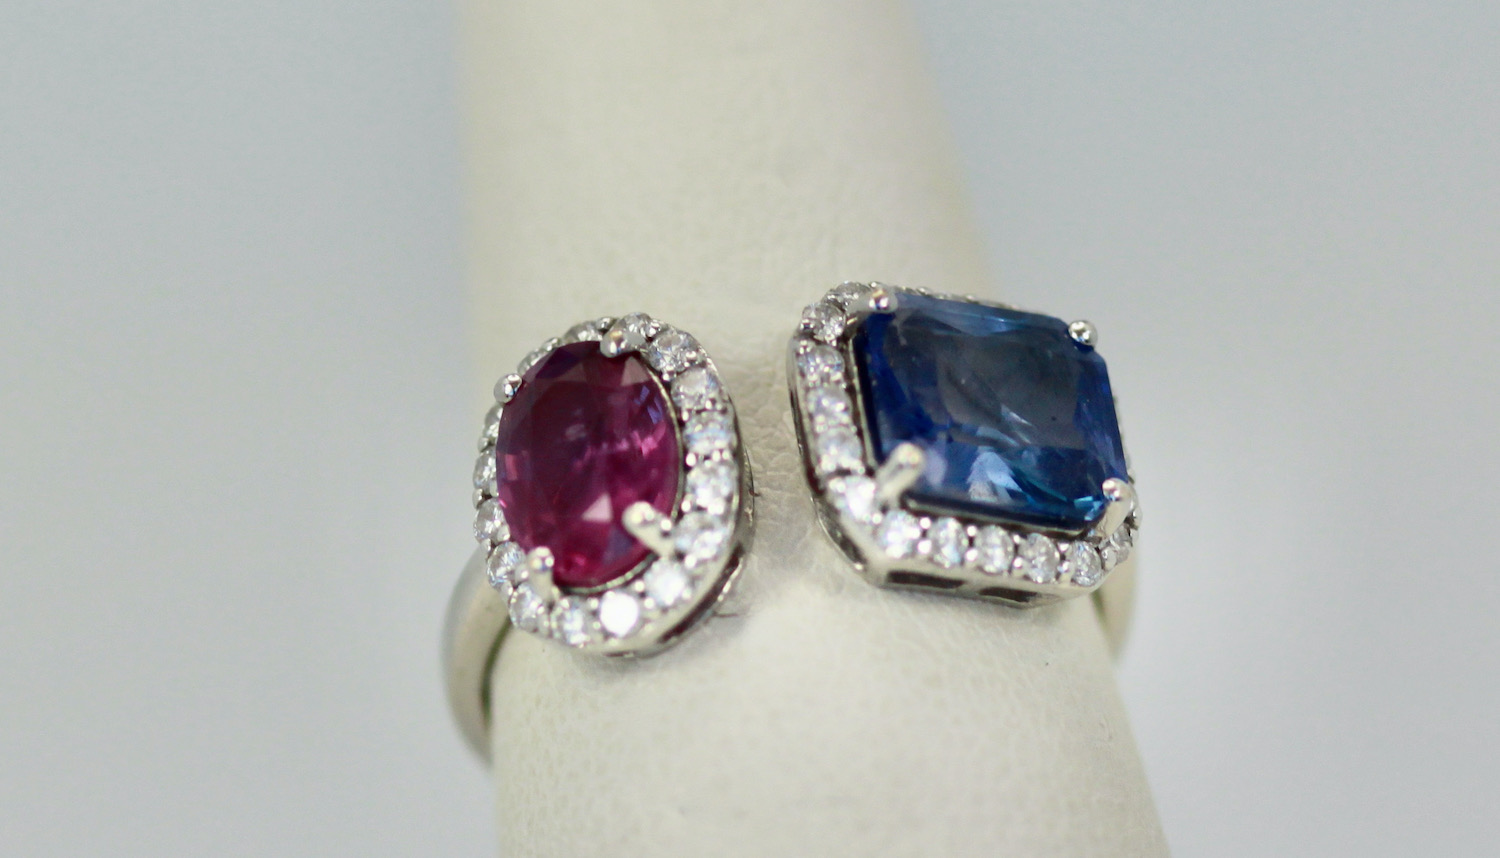 18K Blue and Pink Sapphire Diamond Ring 3.28 carats